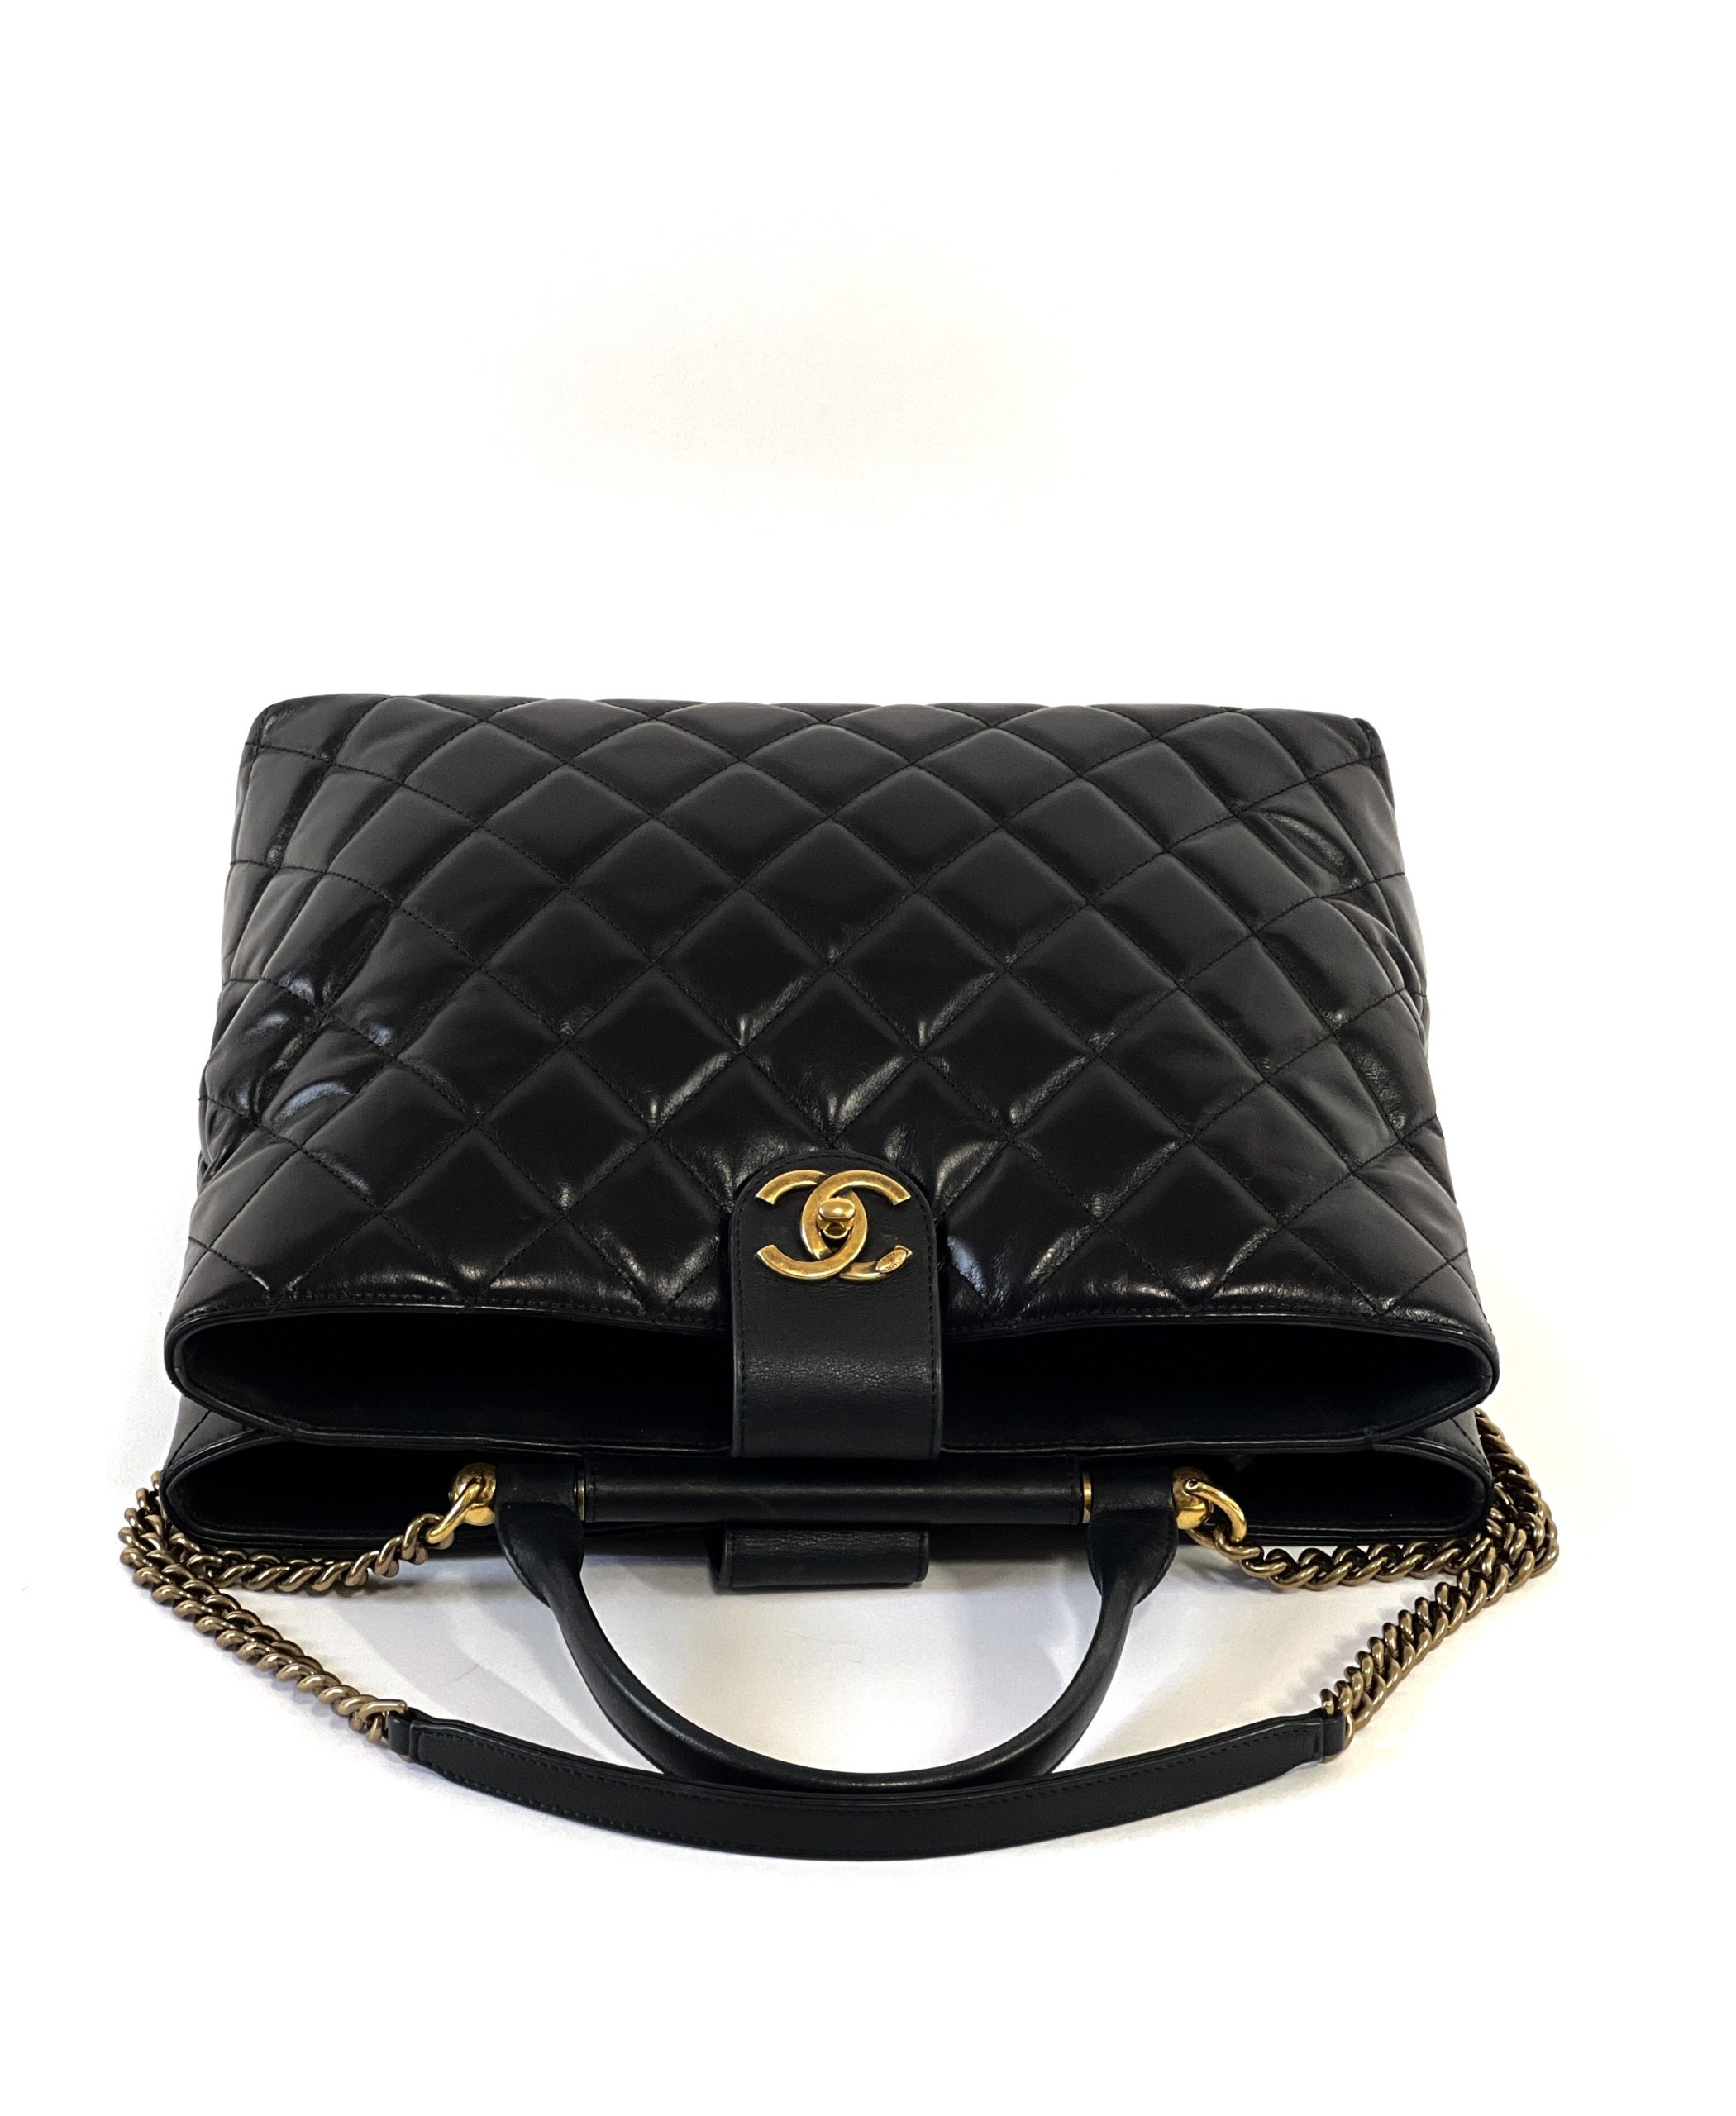 Chanel Small Charm Backpack Black Calfskin Aged Gold Hardware